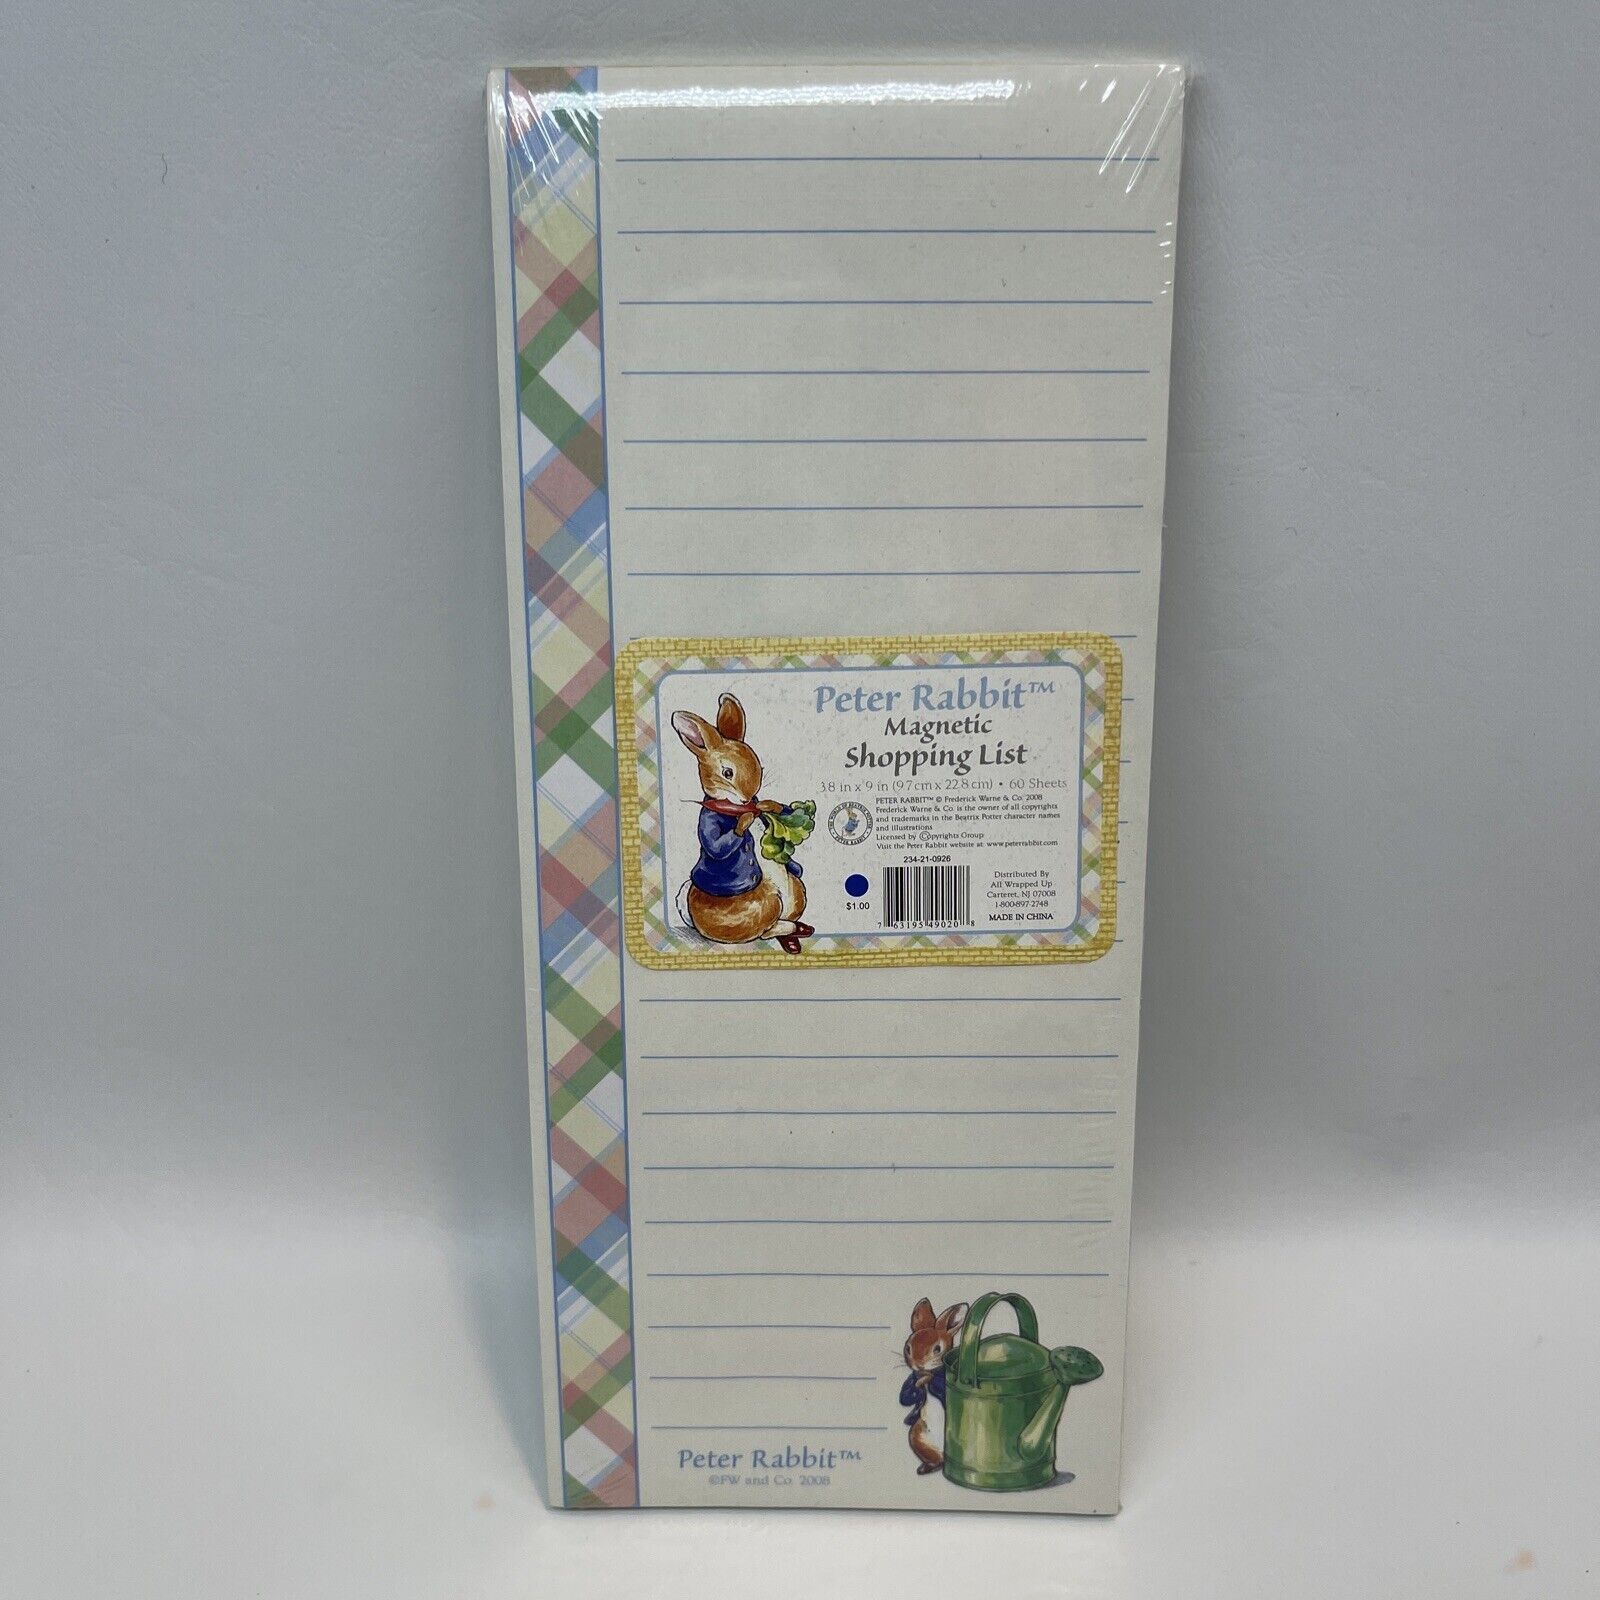 Peter Rabbit Magnetic Shopping List Notepad 2008 NEW Sealed